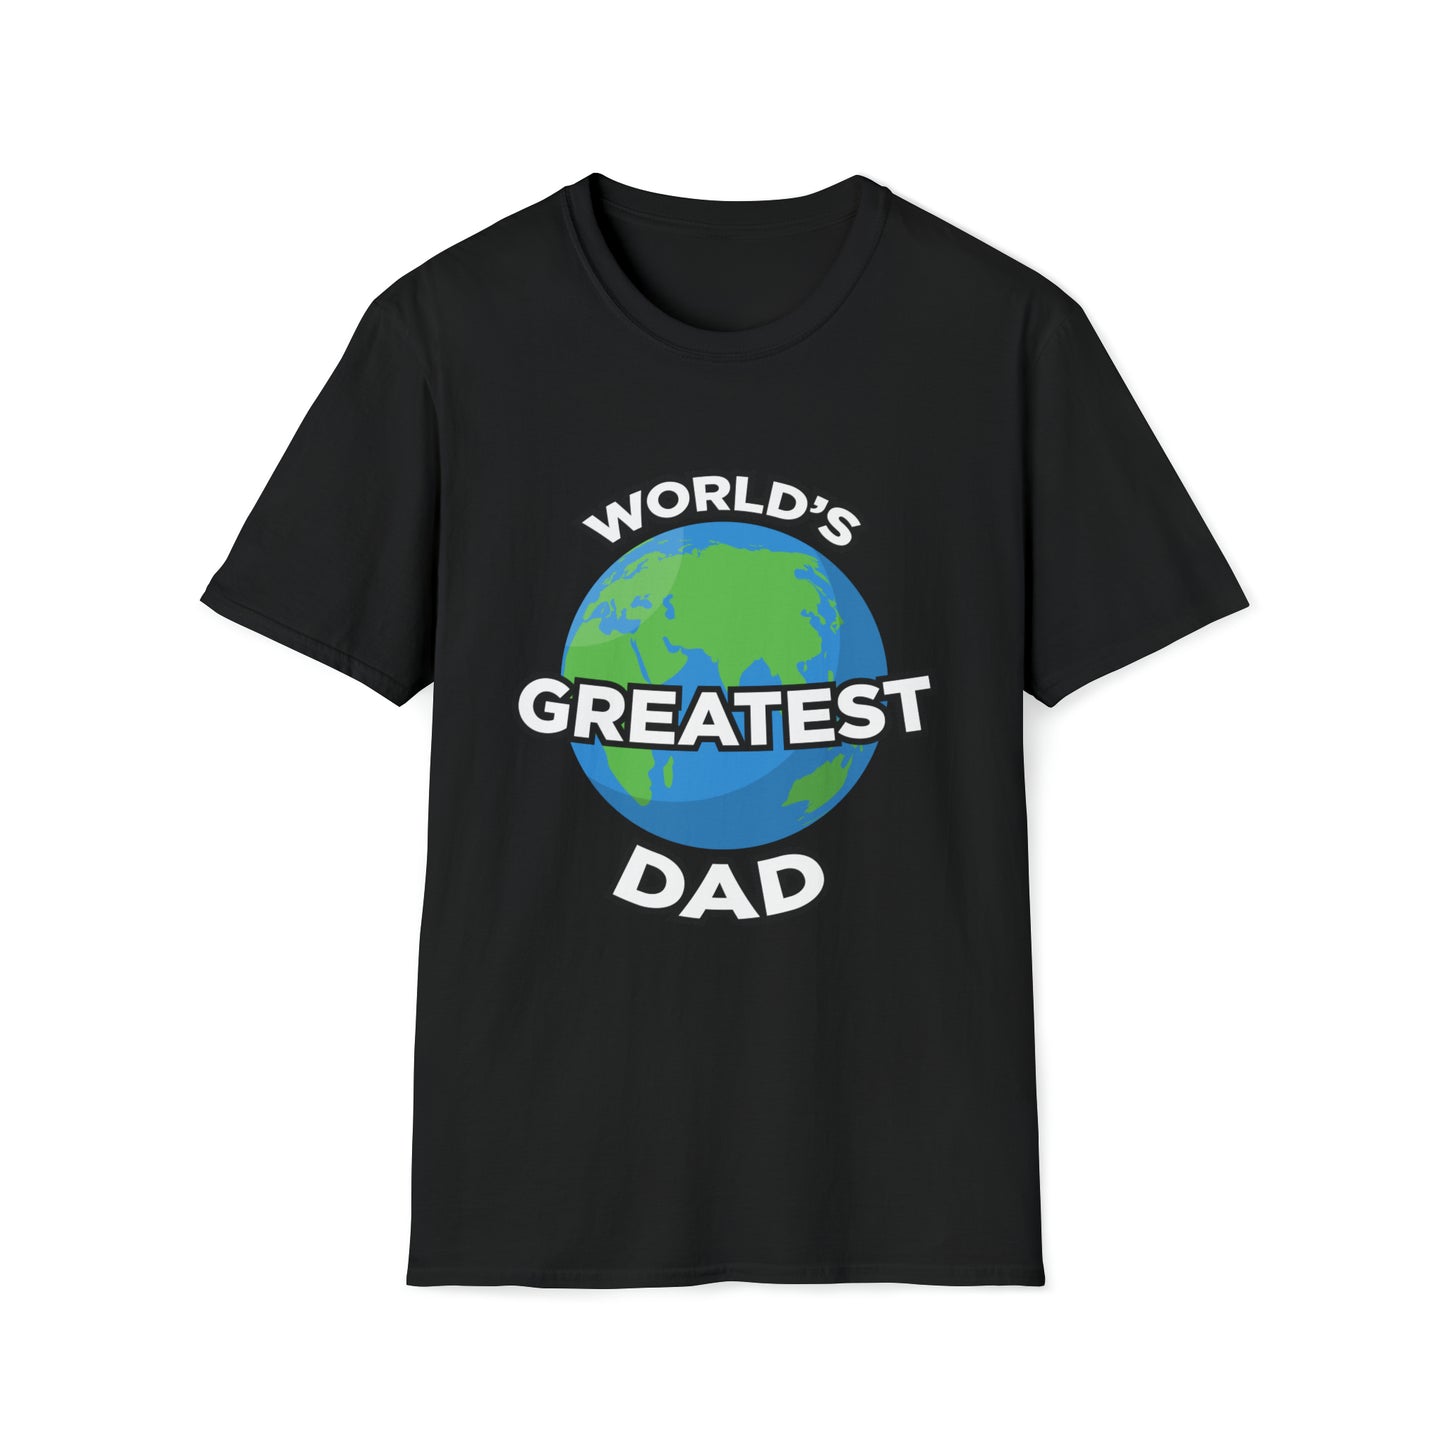 World's Greatest Dad - The T-Shirt That Says It All